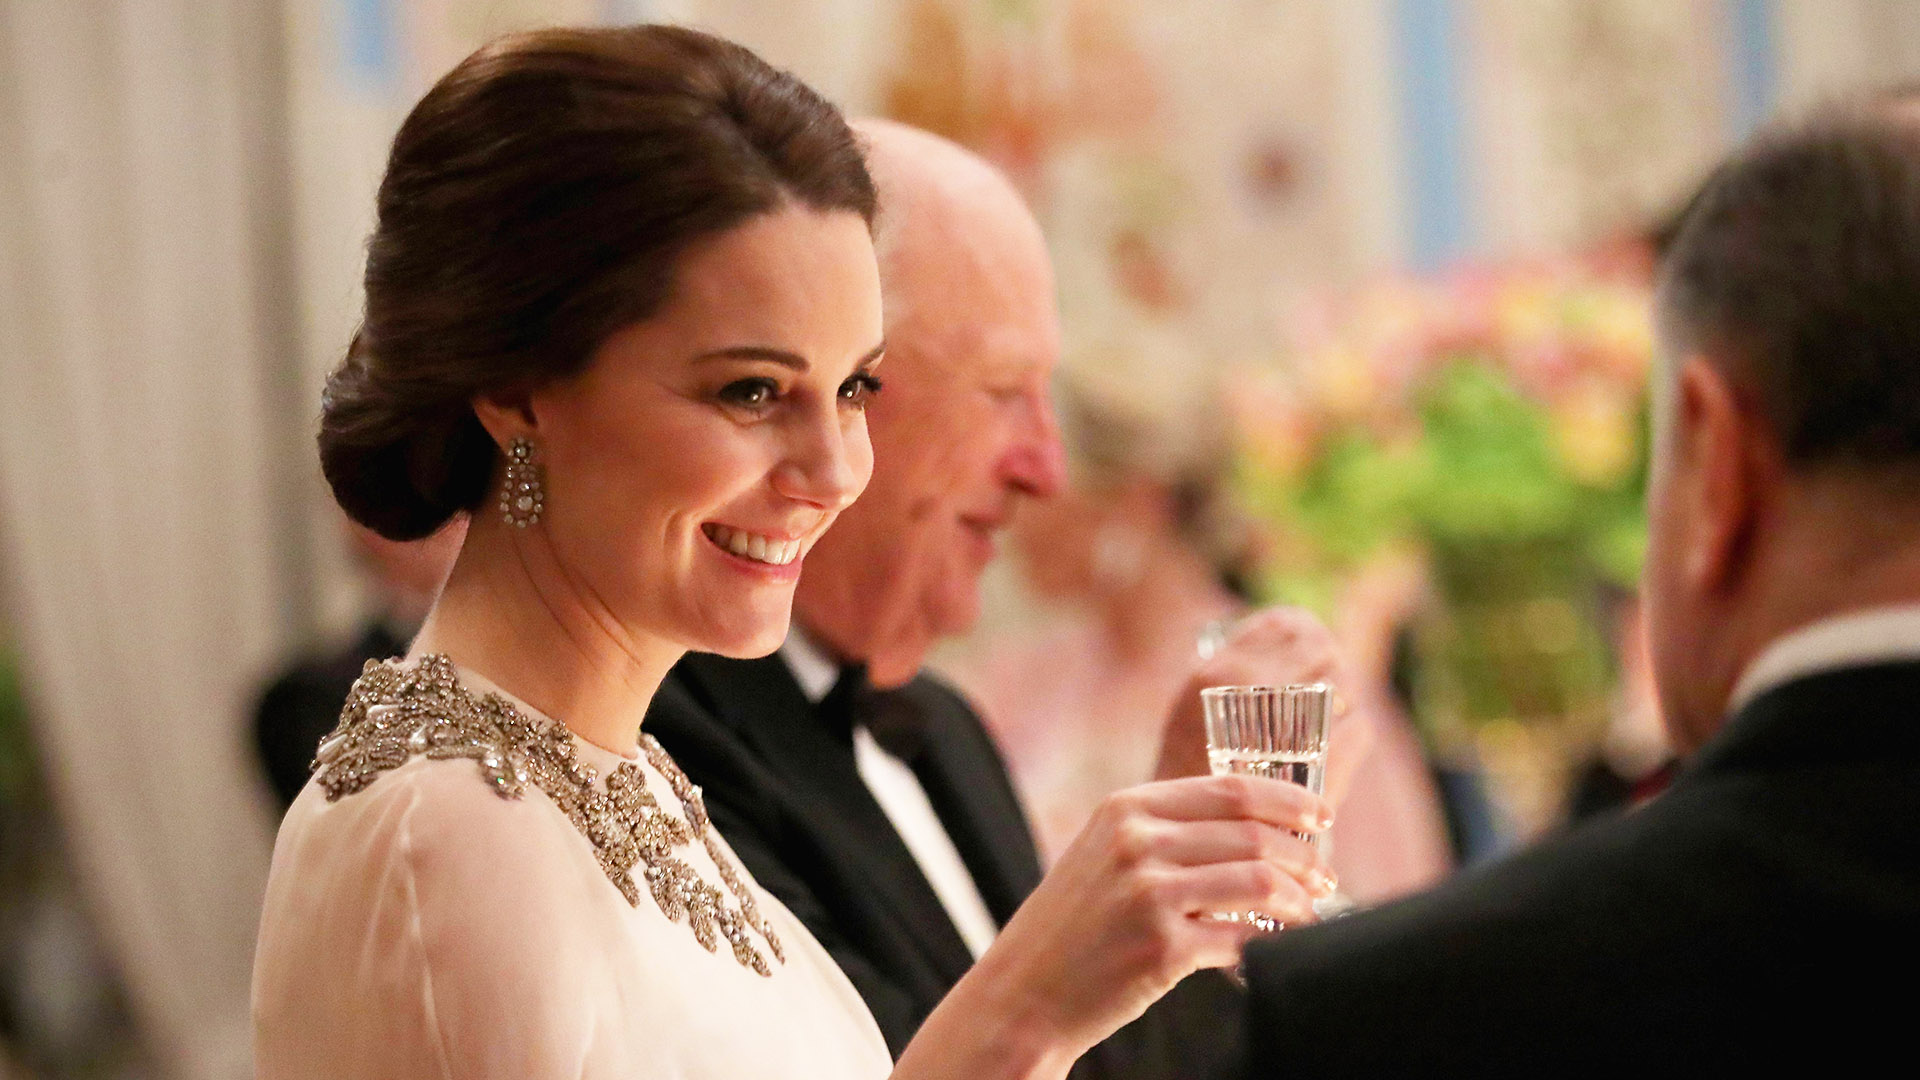 A Surprising Food Kate Middleton Was Banned From Having for Dinner